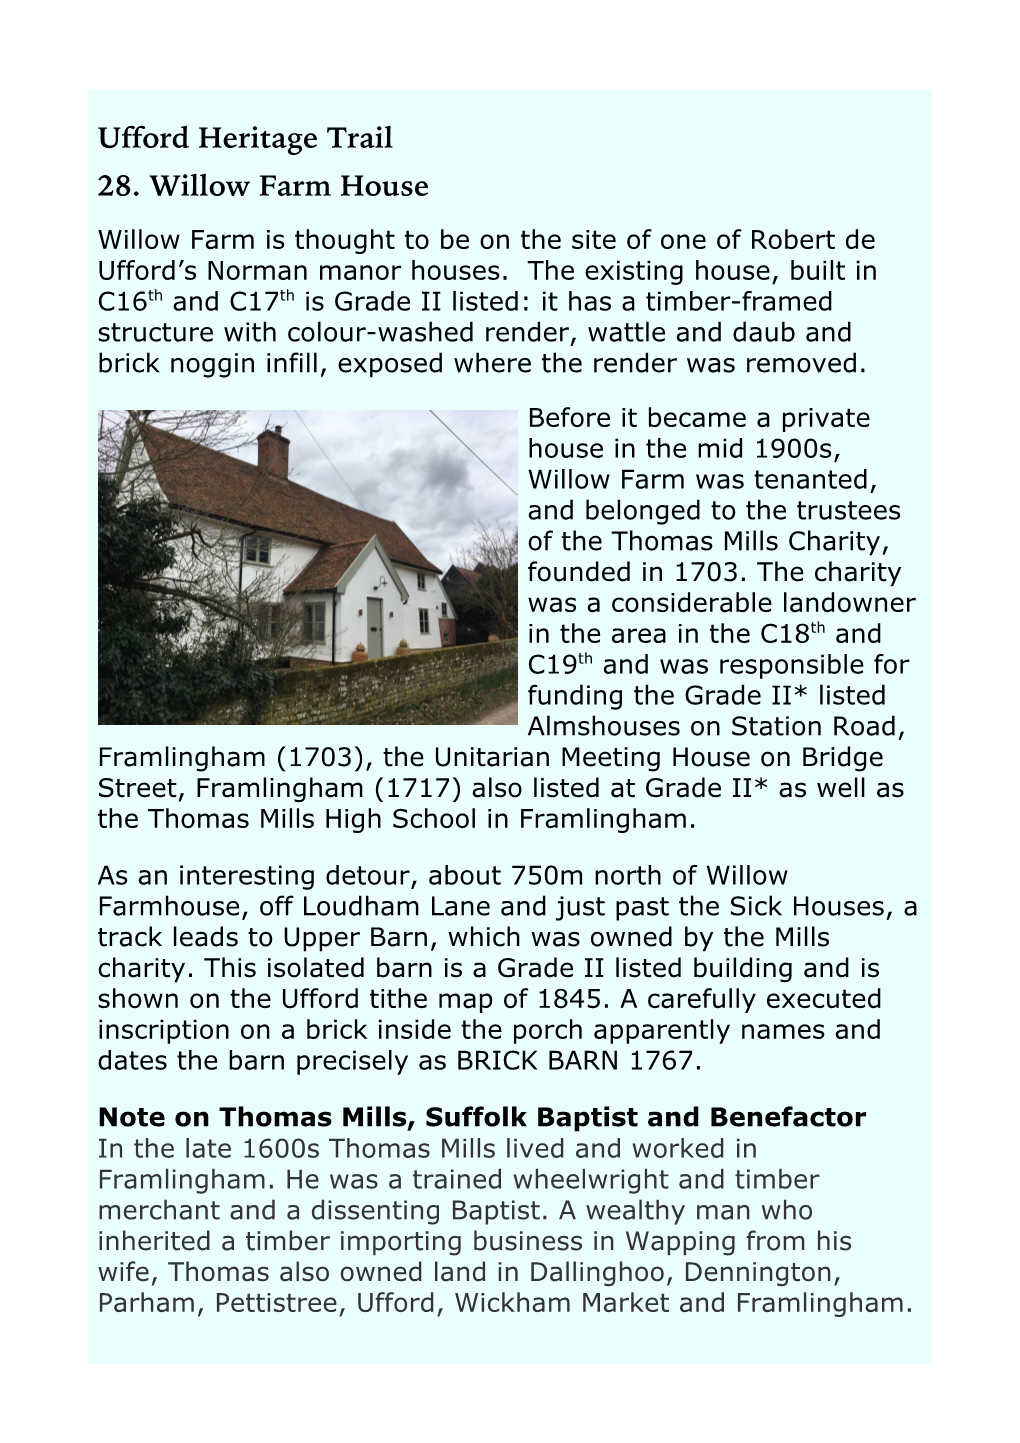 Ufford Heritage Trail 28. Willow Farm House Willow Farm Is Thought to Be on the Site of One of Robert De Ufford’S Norman Manor Houses